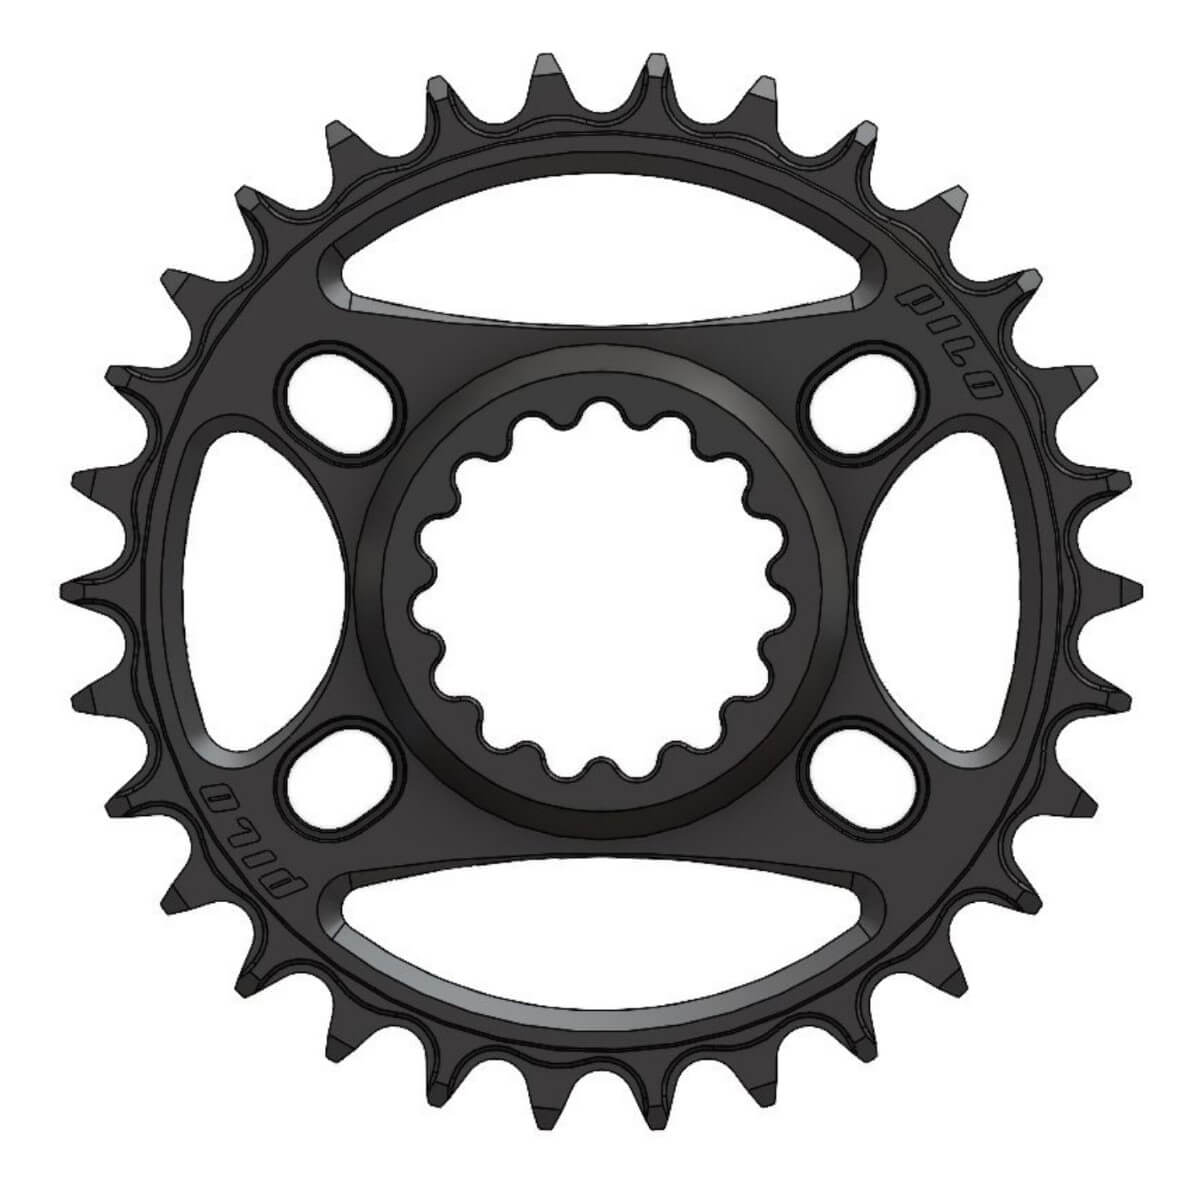 Pilo C76 e*thirteen direct Chainring Narrow Wide 30T Hyperglide+ Compatible